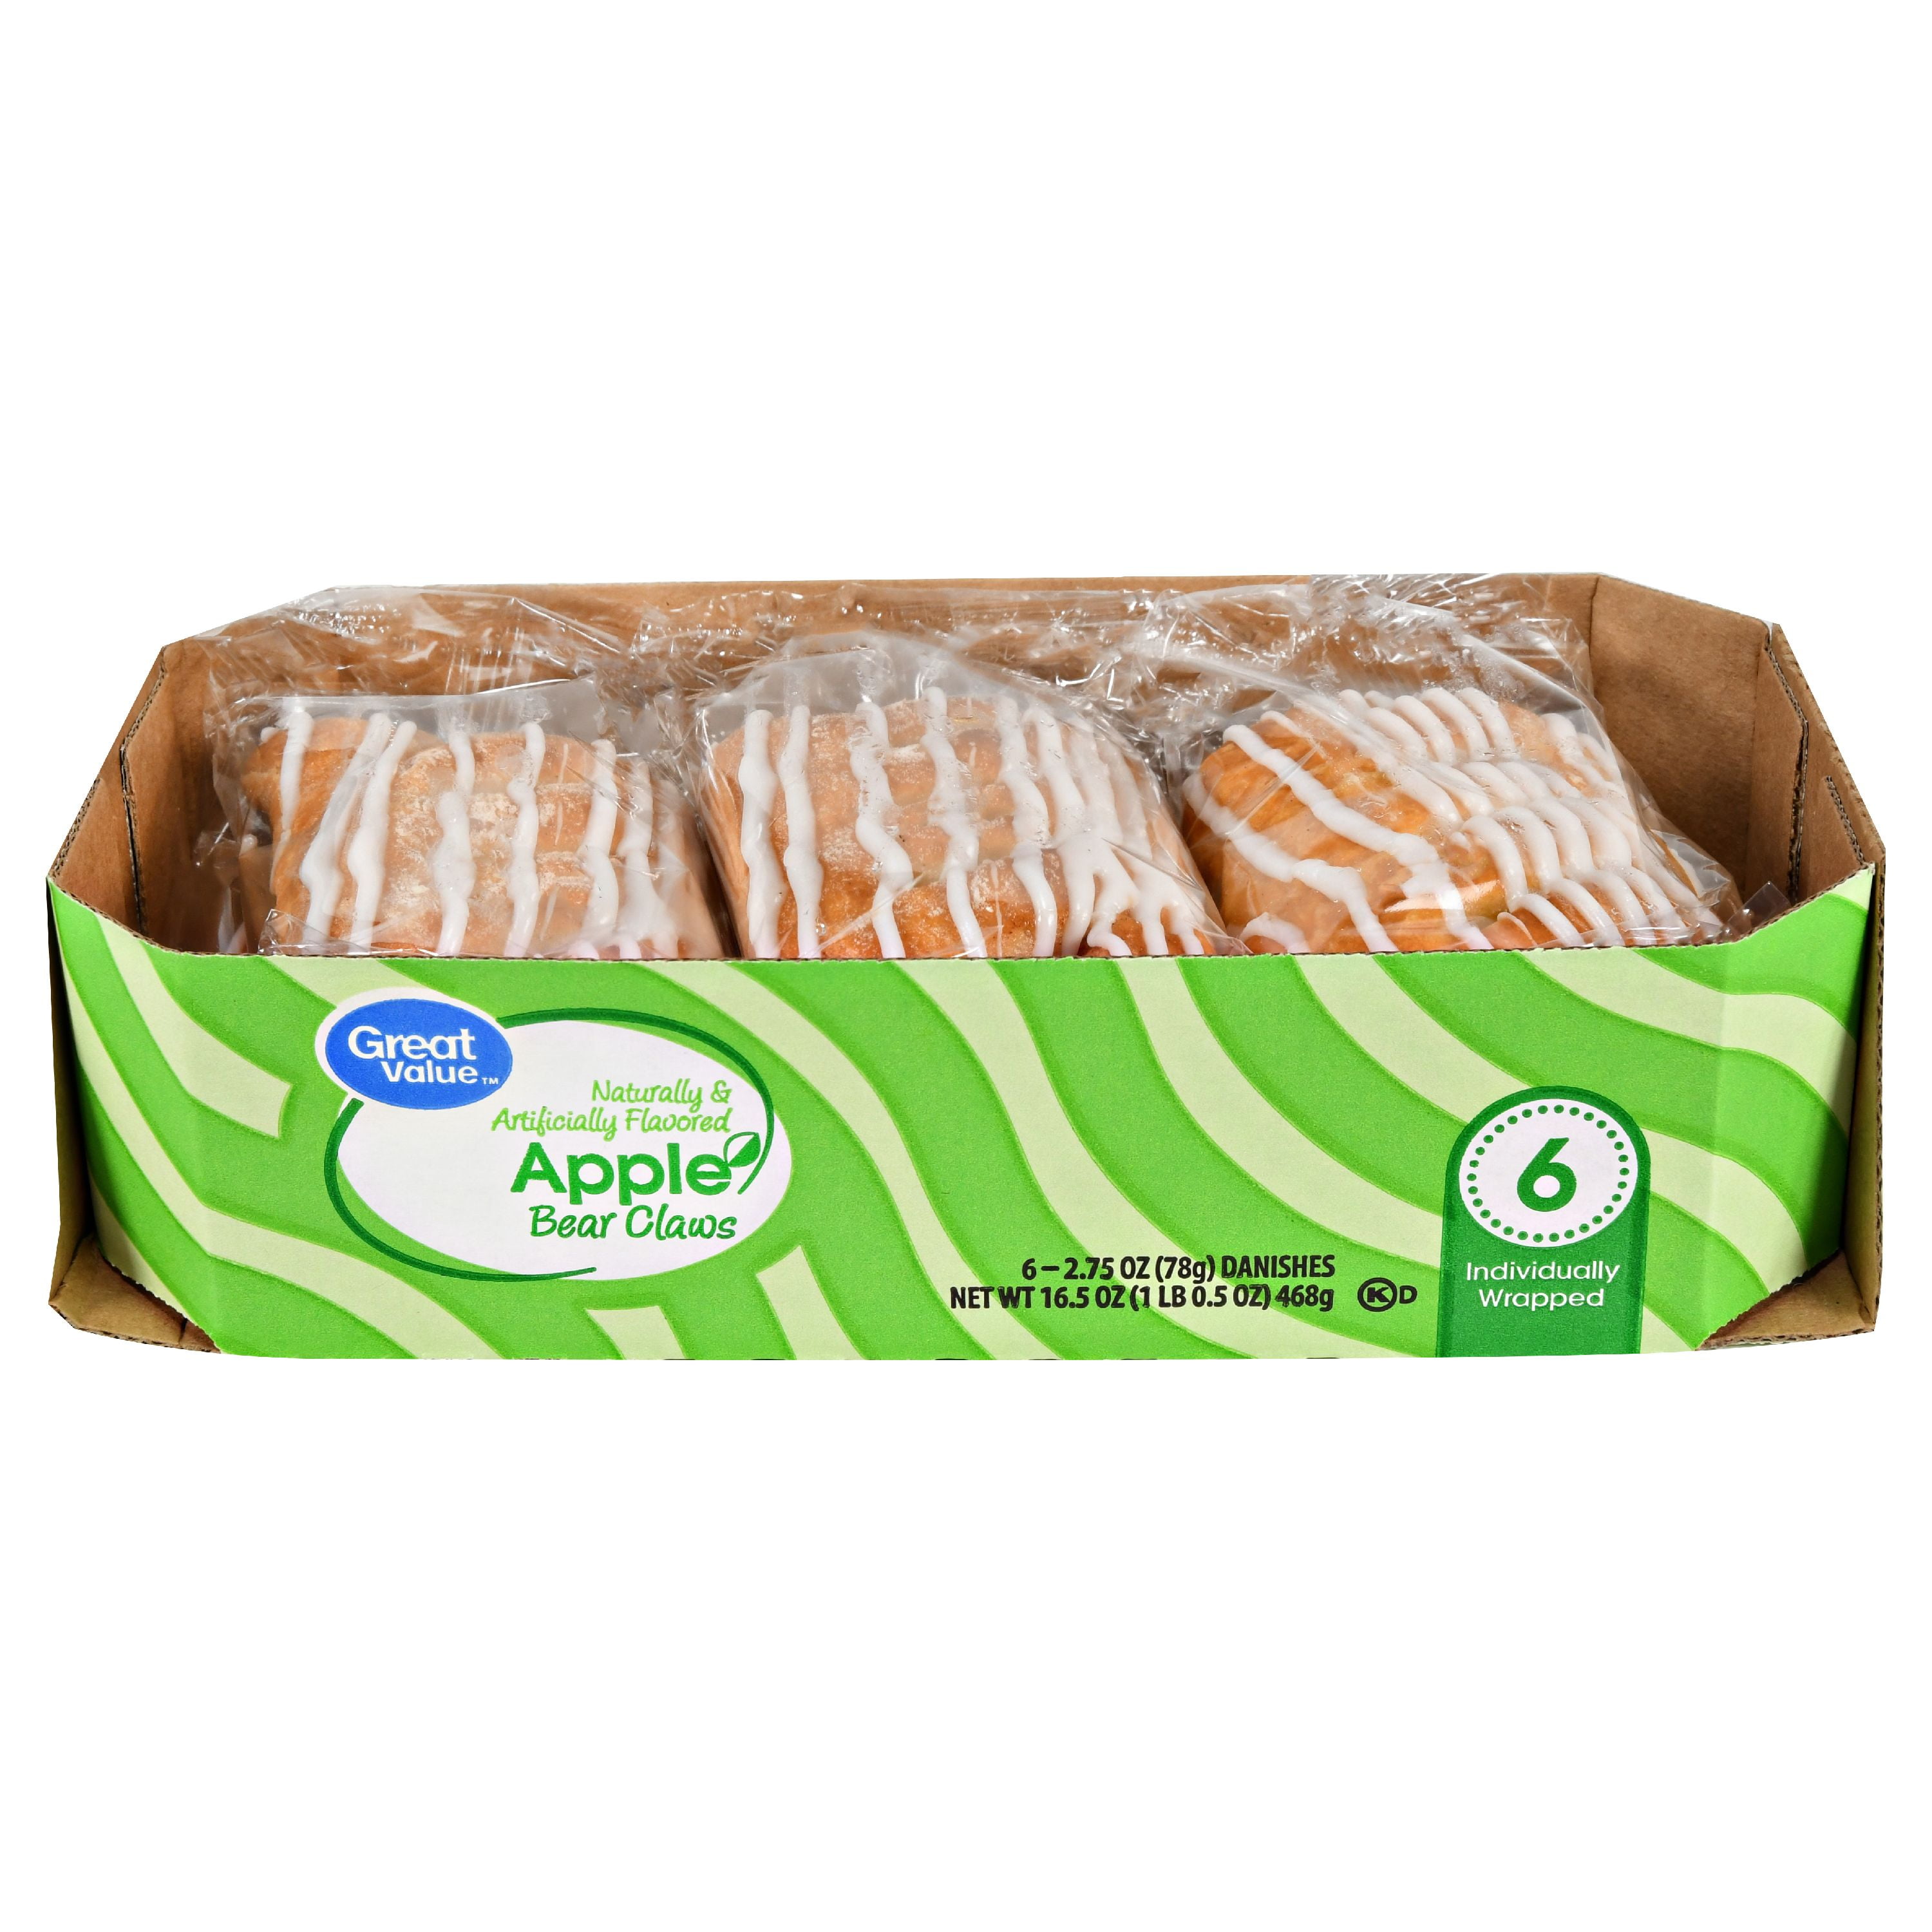 Great Value Apple Bear Claws, 16.5 oz, 6 Count